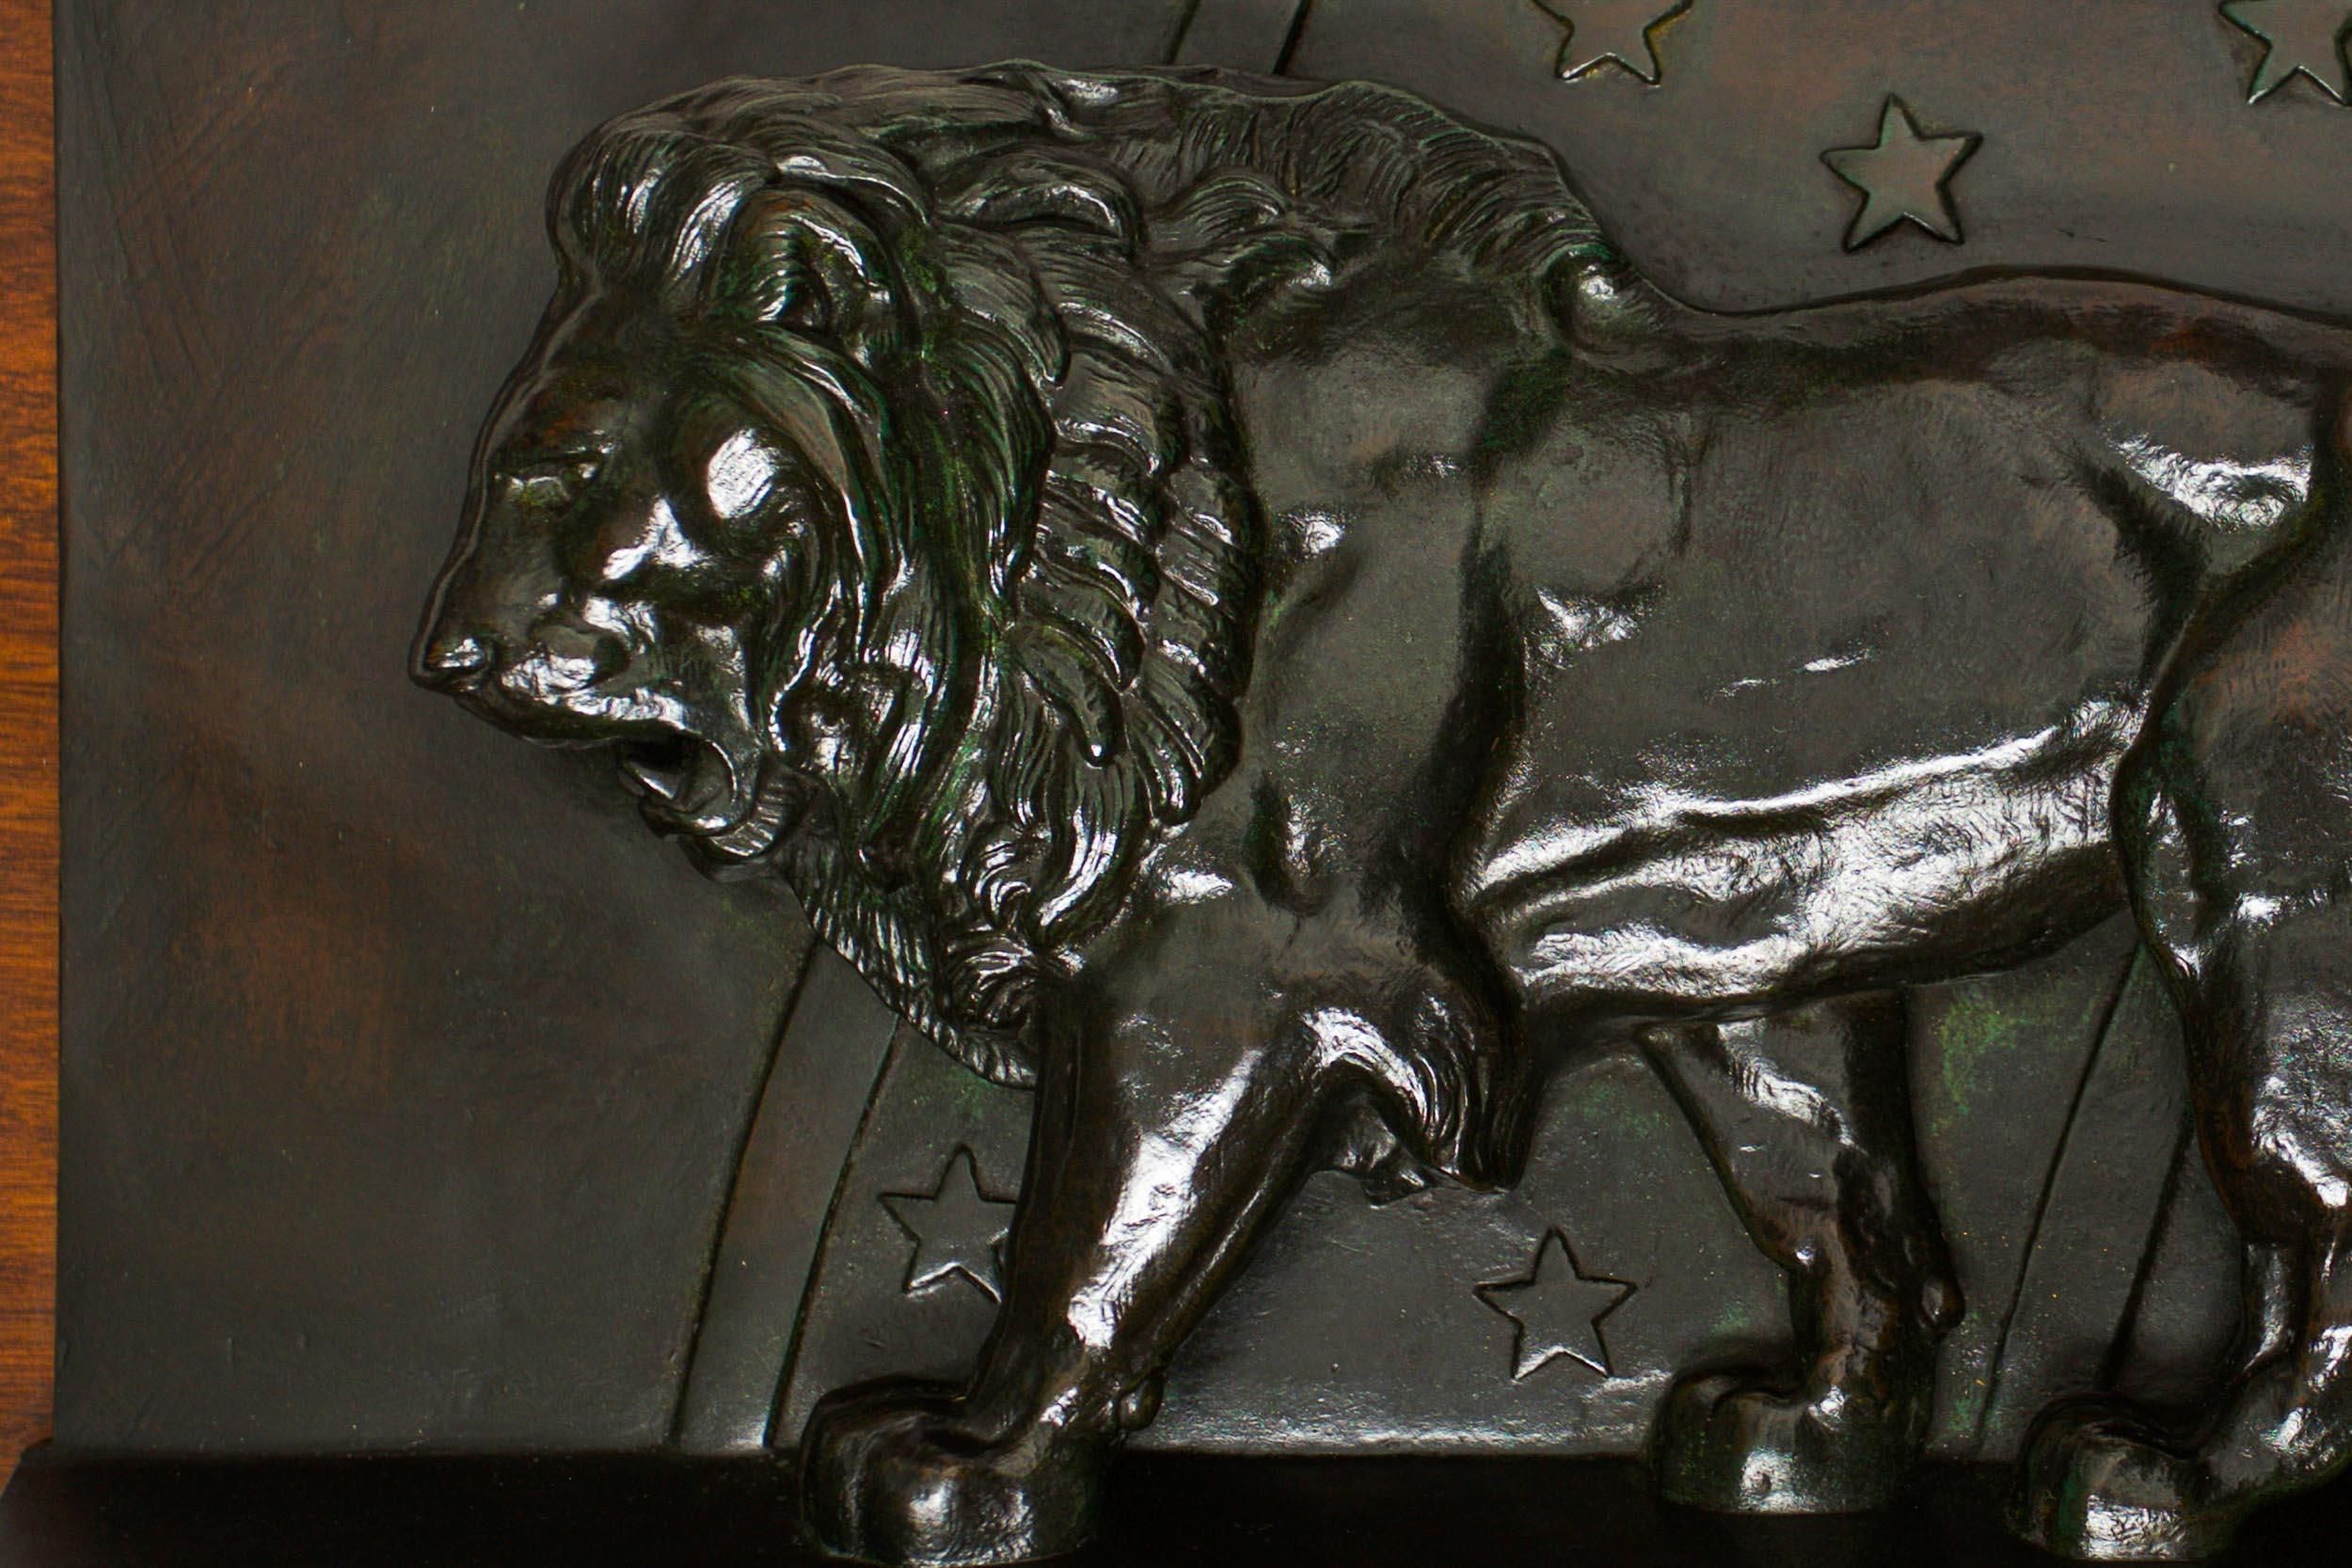 THE LION OF THE JULY COLUMN: LION OF THE ZODIAC

AFTER A MODEL BY ANTOINE-LOUIS BARYE

Patinated bronze on walnut plaque  Signed 